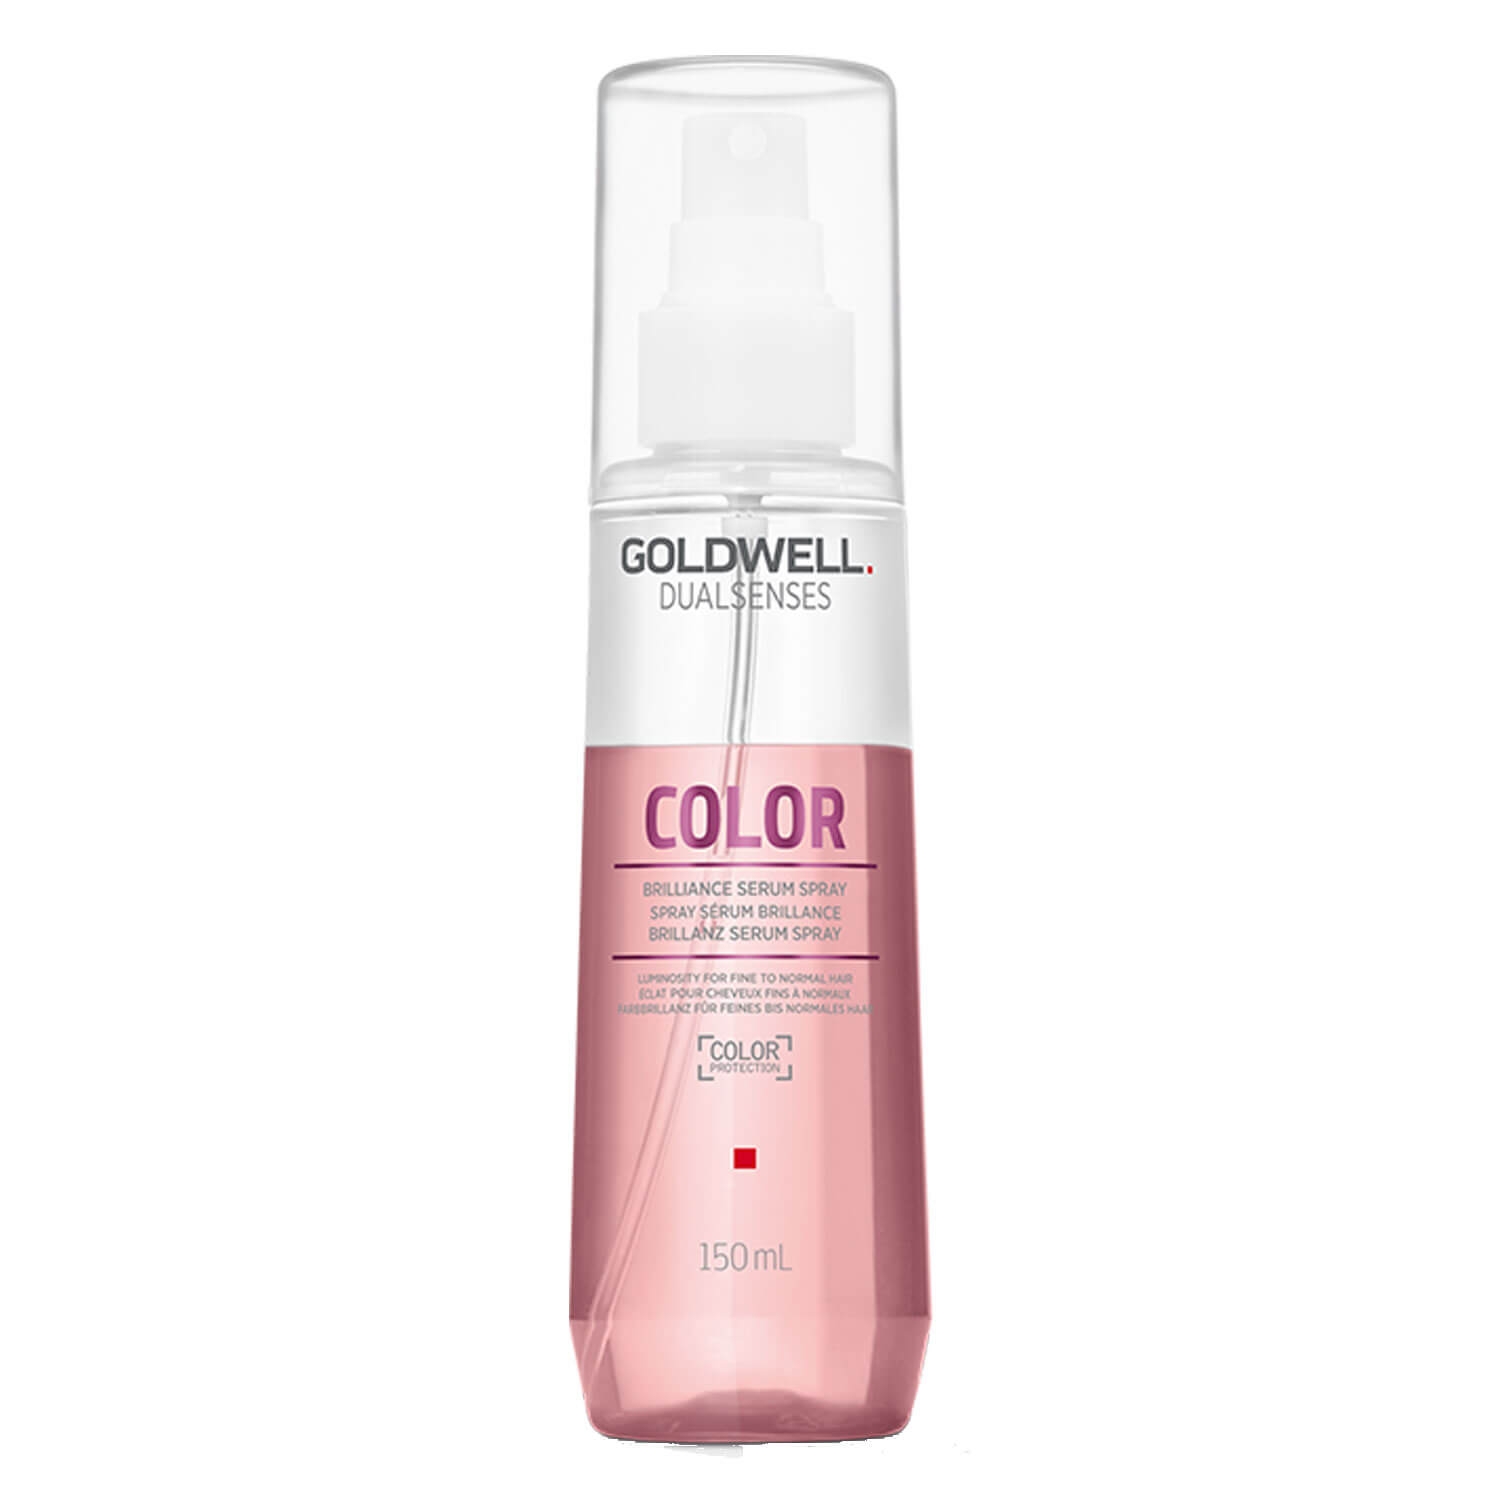 Product image from Dualsenses Color - Brilliance Serum Spray